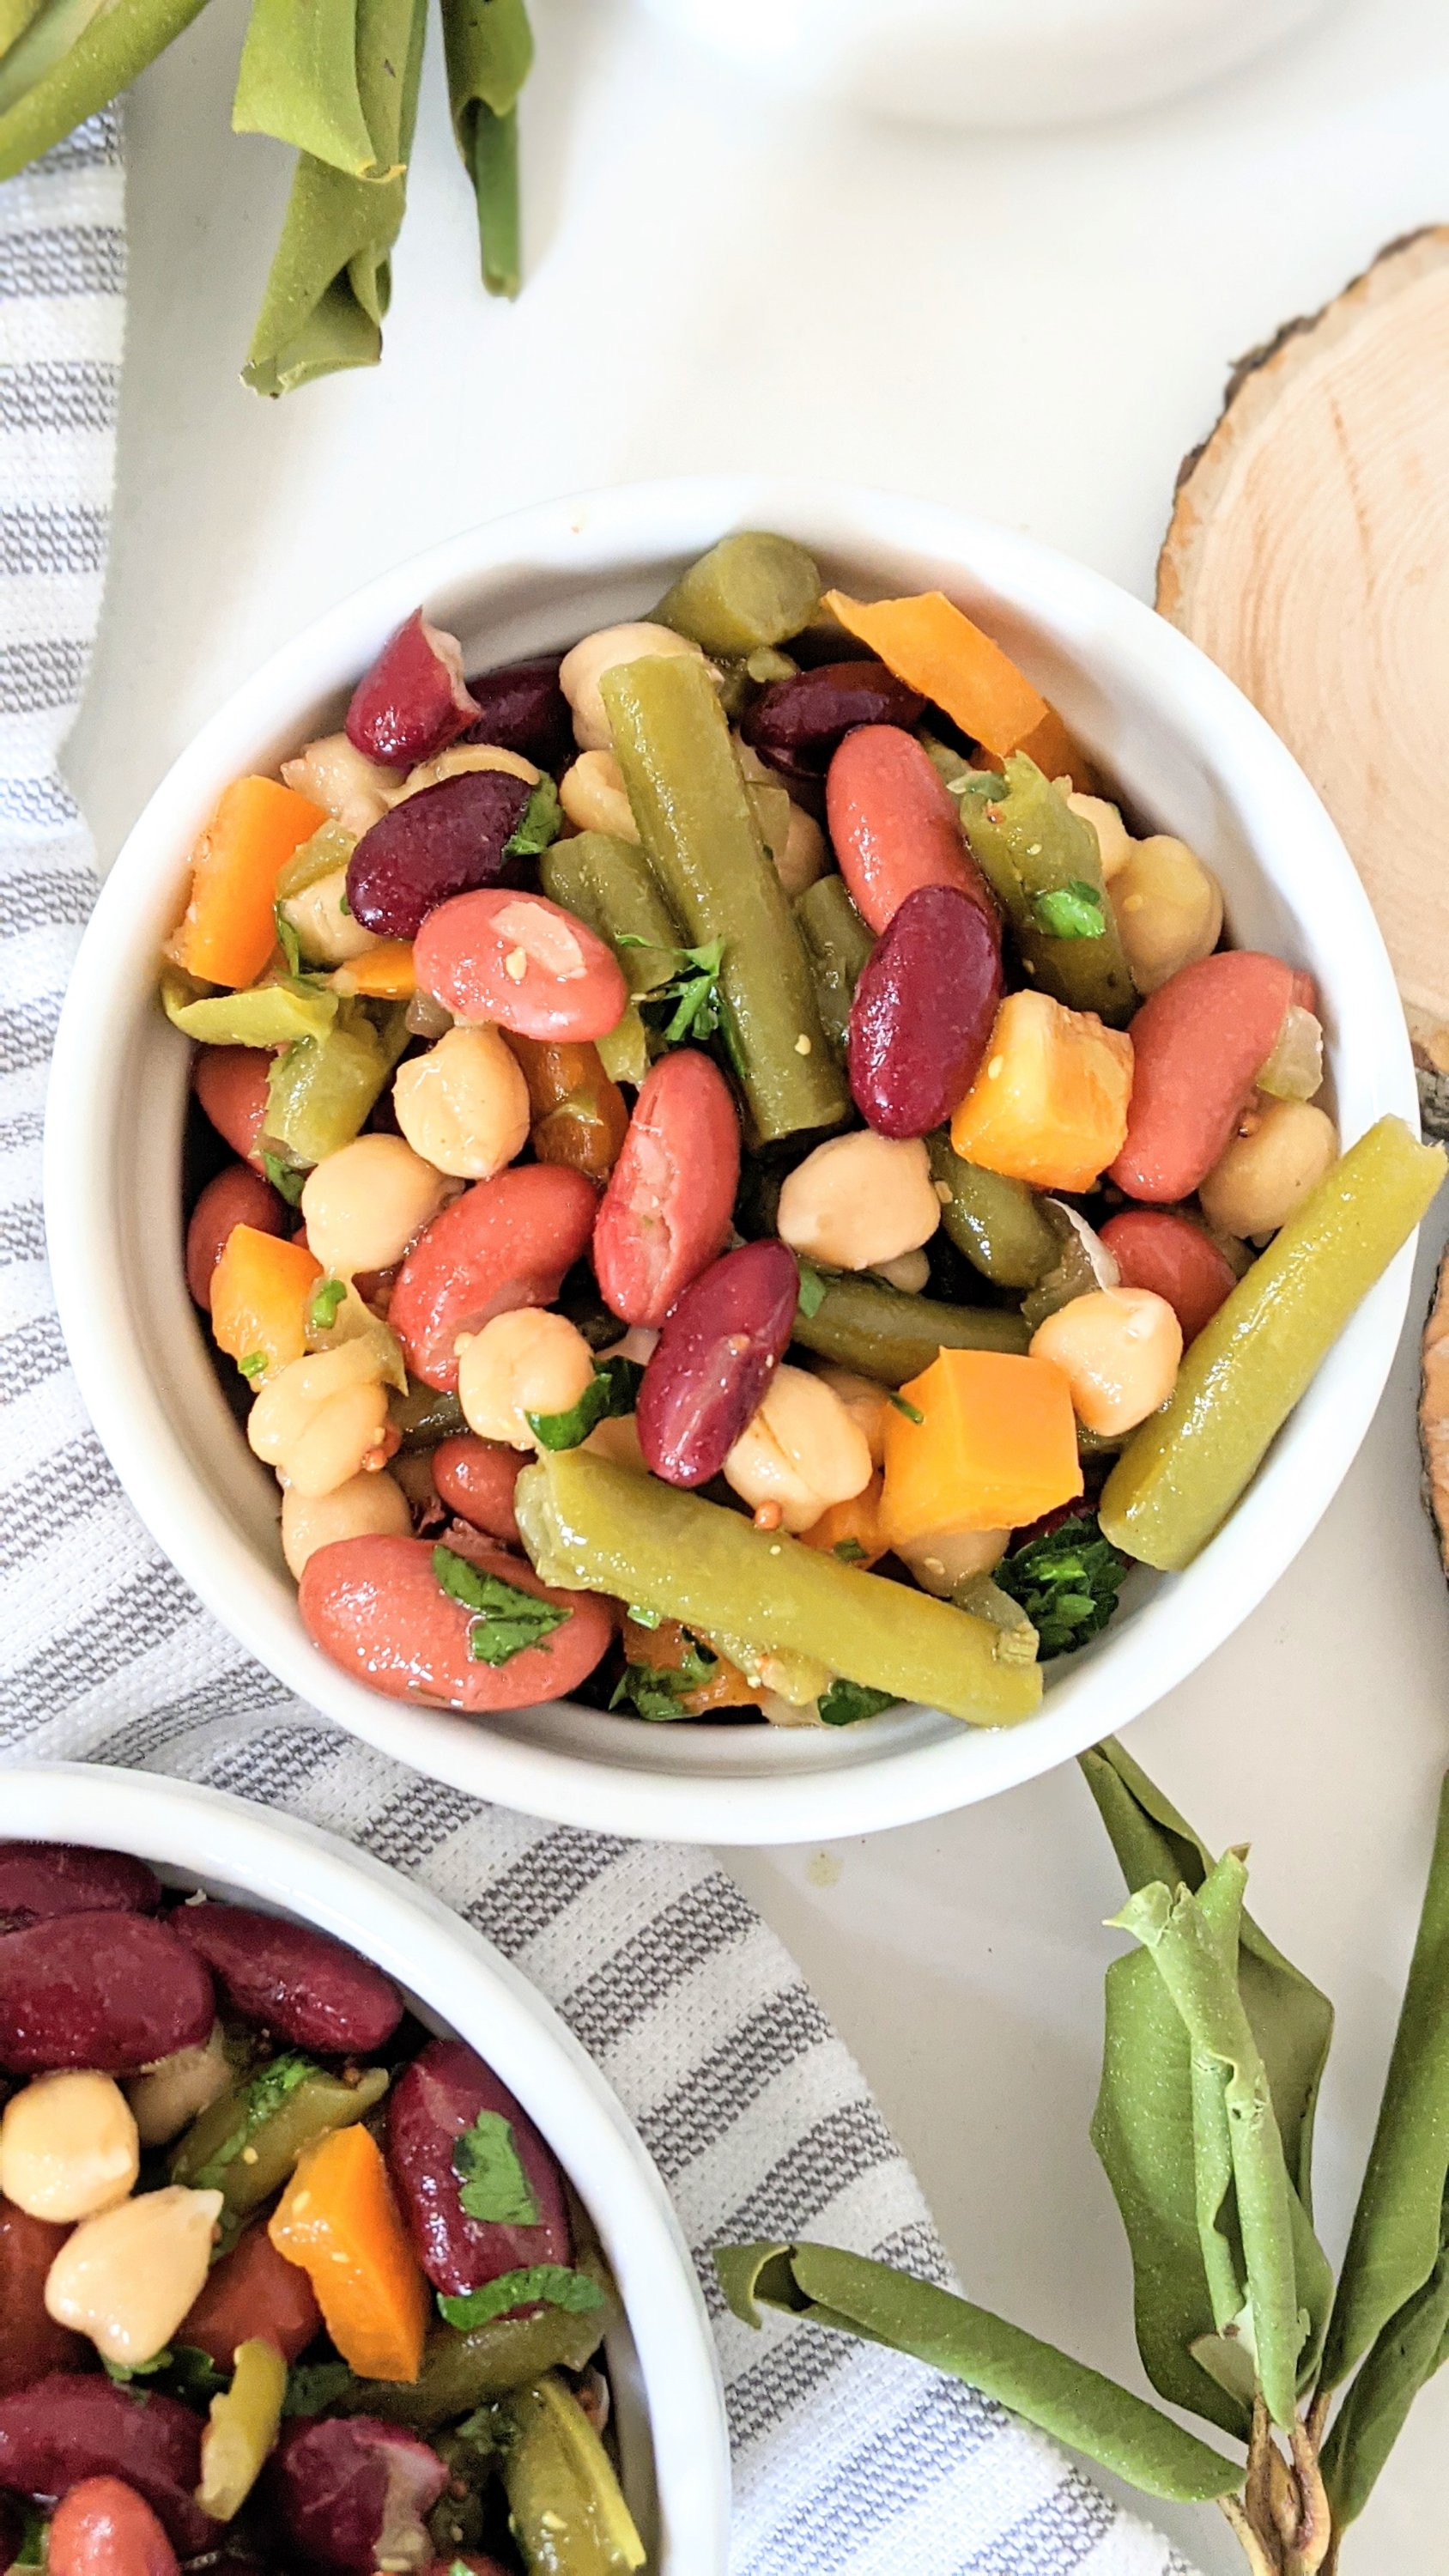 vegetarian bean salad recipe vegan gluten free summer side dishes healthy homemade pantry staple last minute bbq side dish ideas healthy homemade quick side dish with ingredients i have